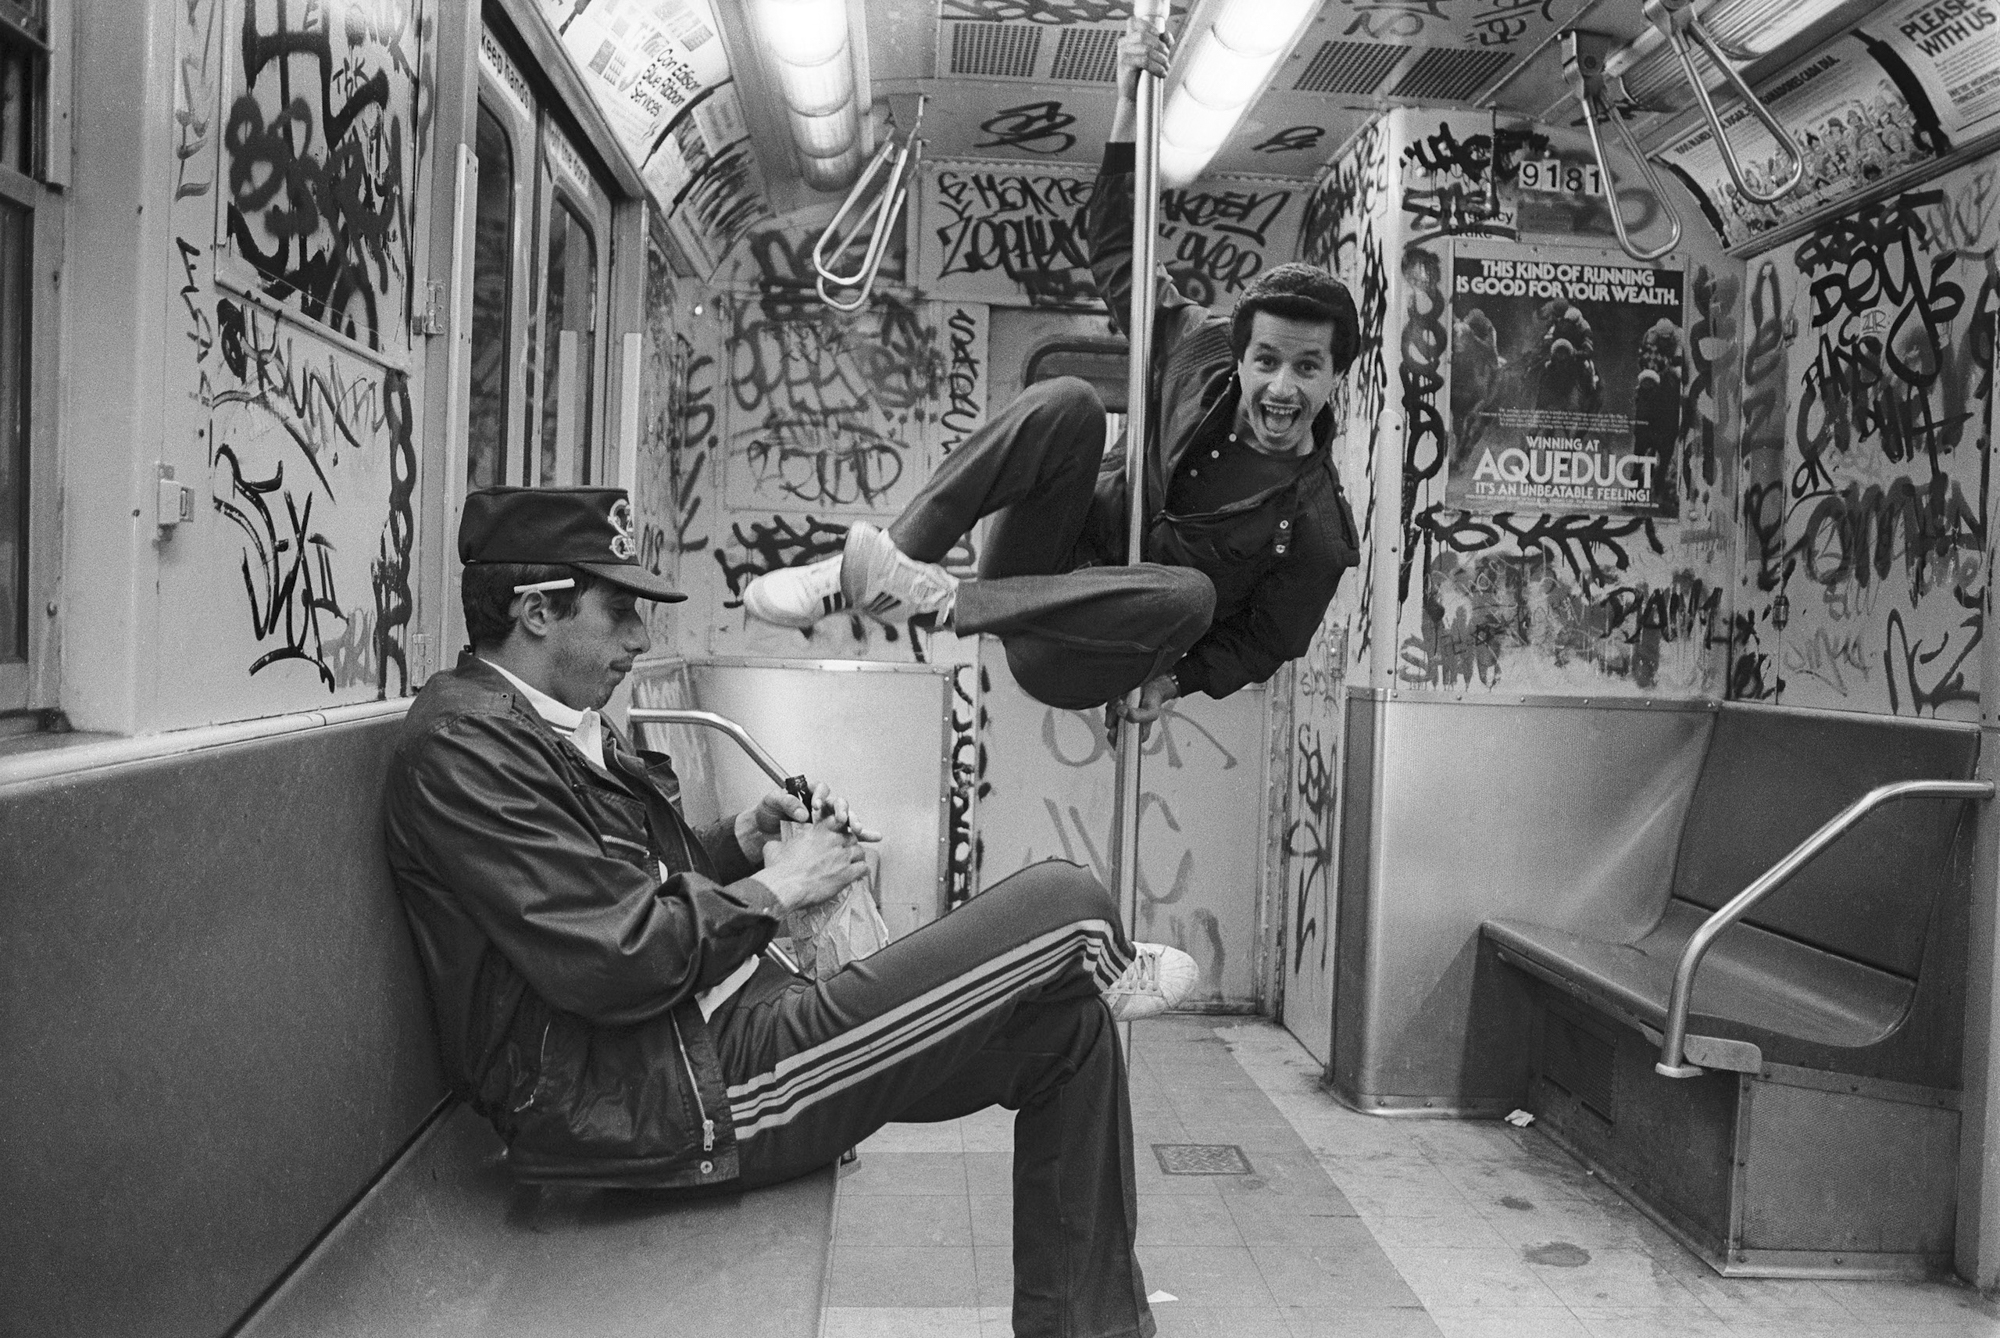 Carlos and Boogie on the 6 Train - 1984, Photo by Ricky Flores